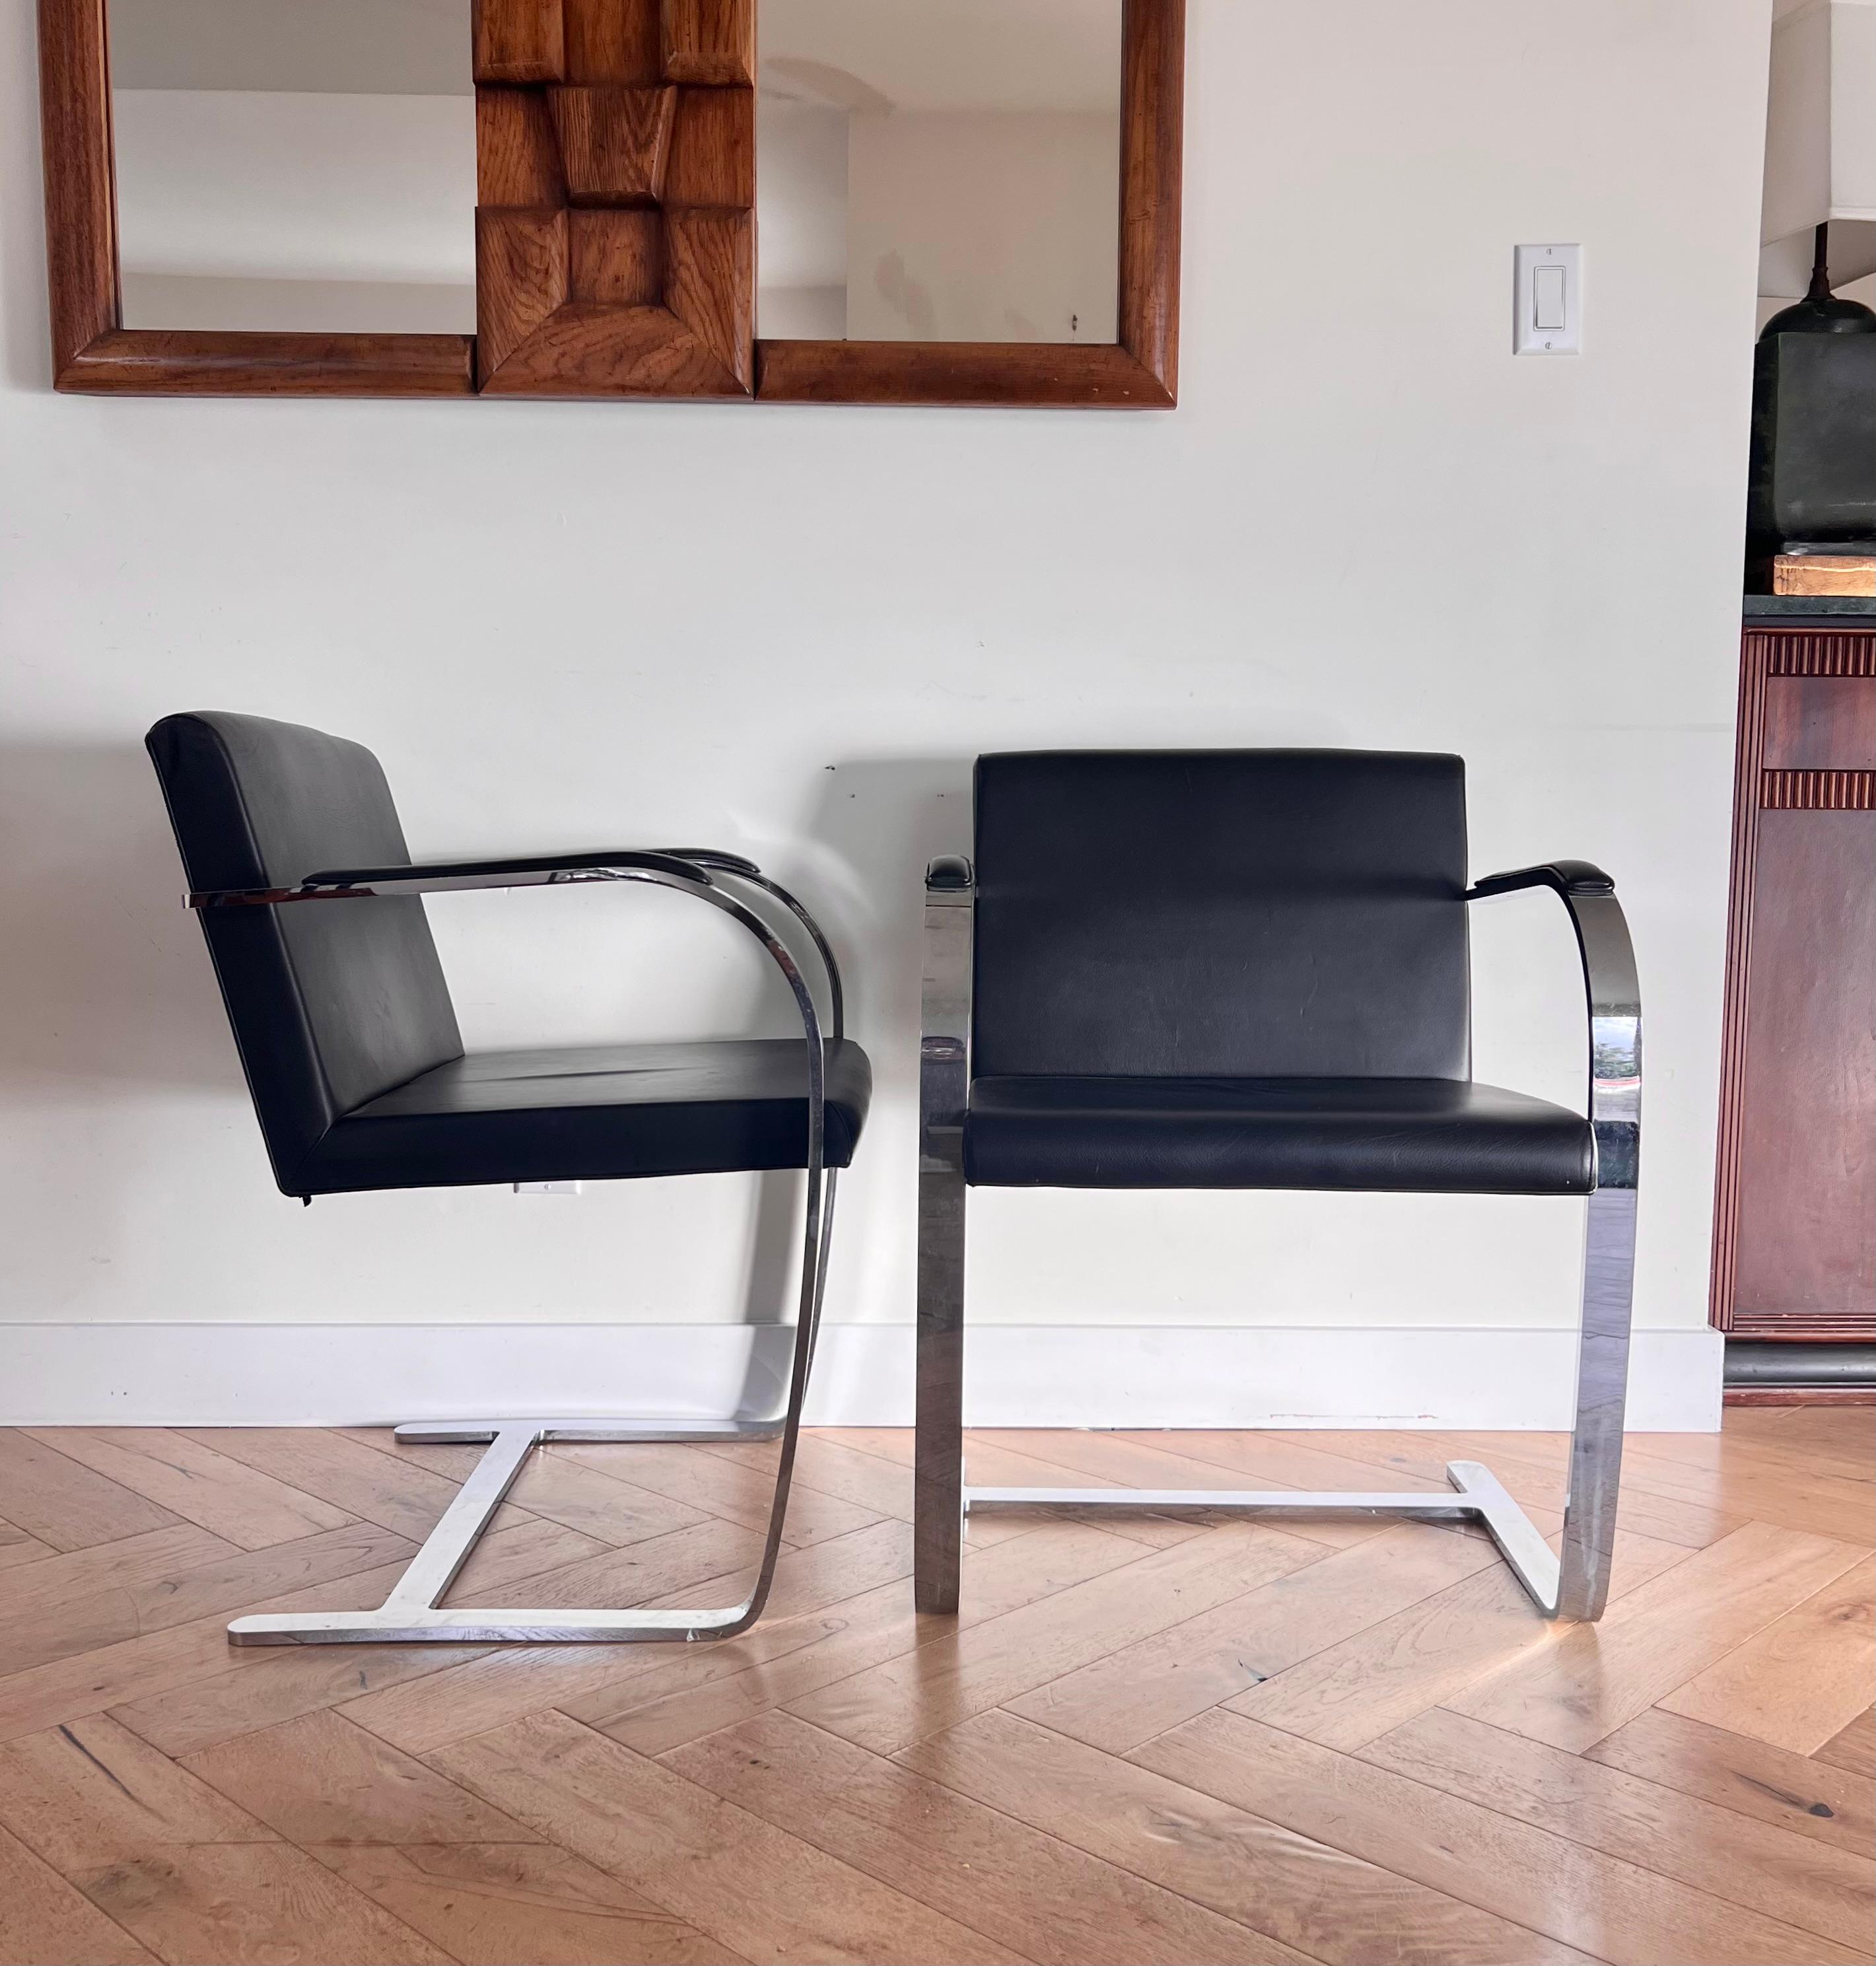 Pair of Mies van der Rohe Brno chairs by Palazzetti, 1970s For Sale 9